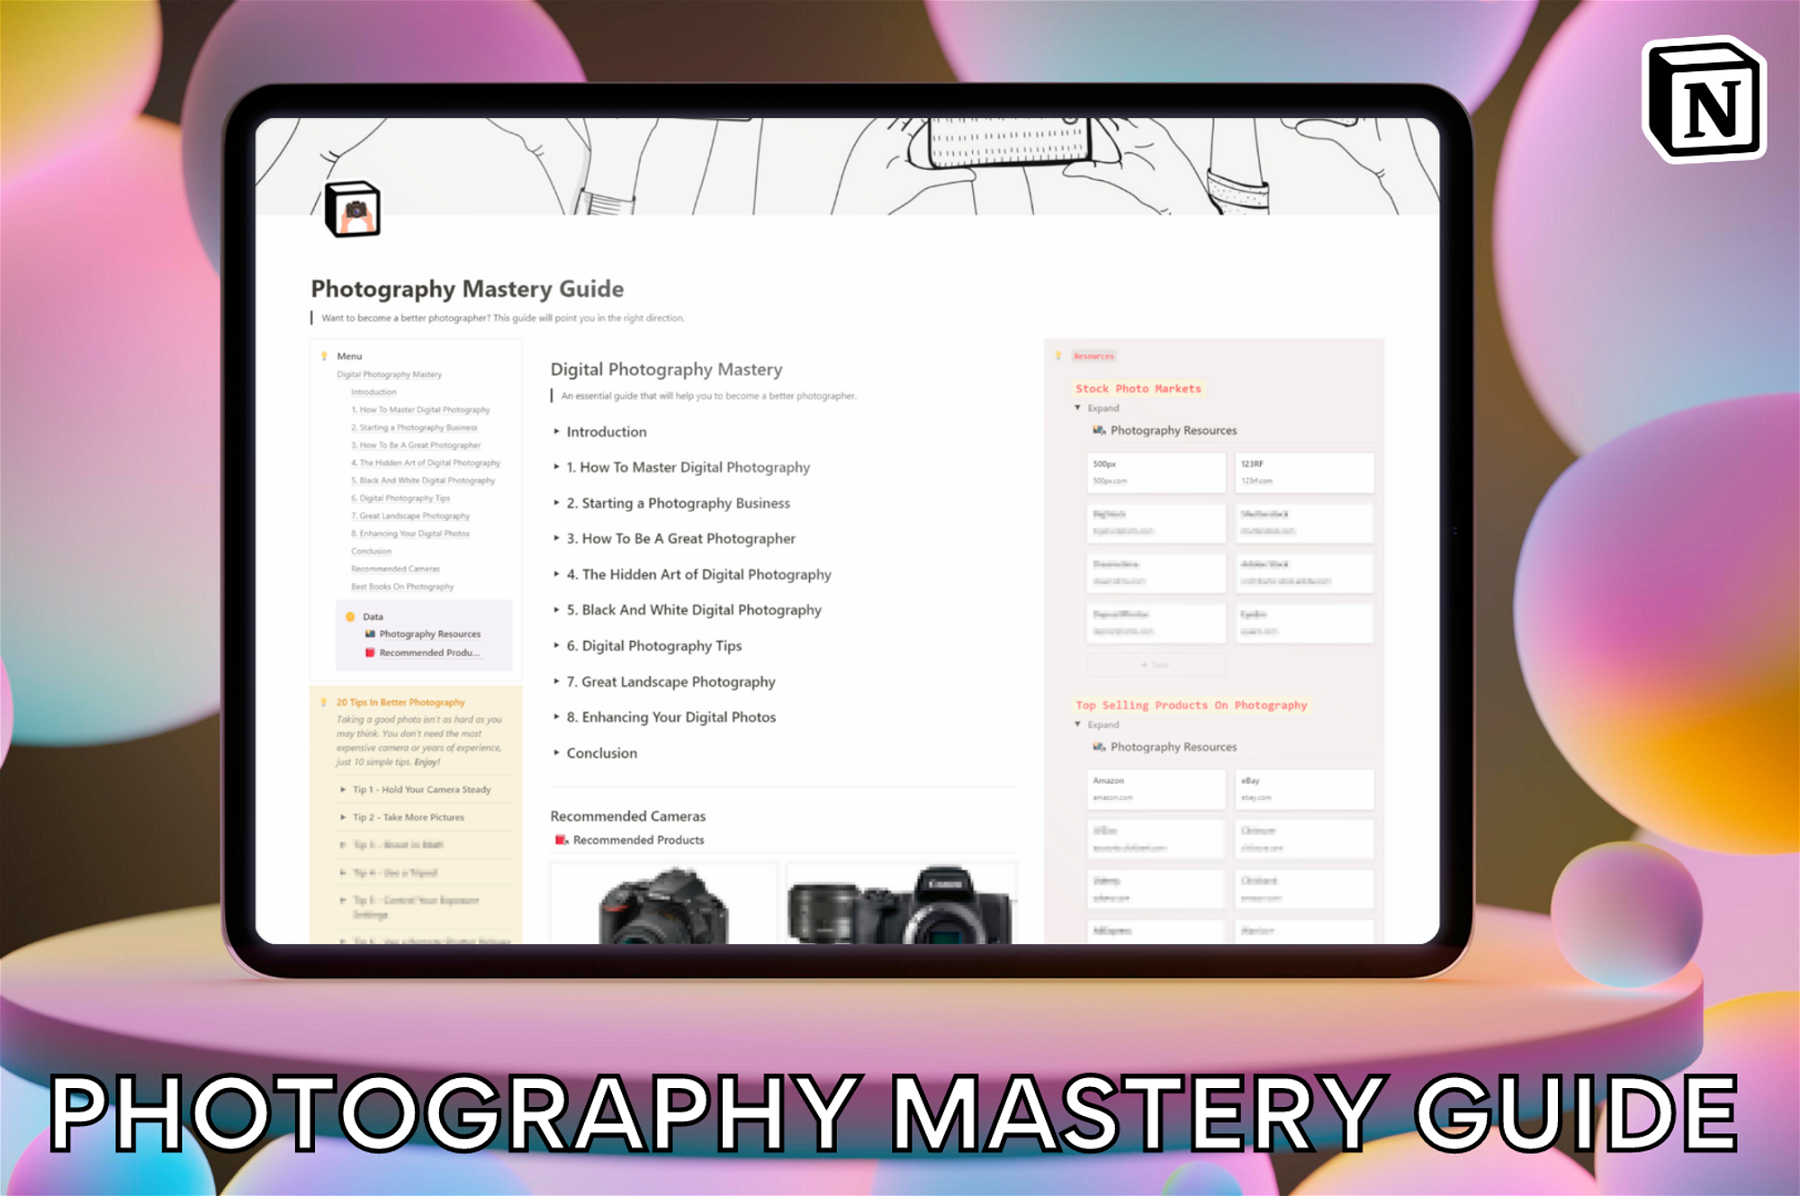 Photography Mastery Guide